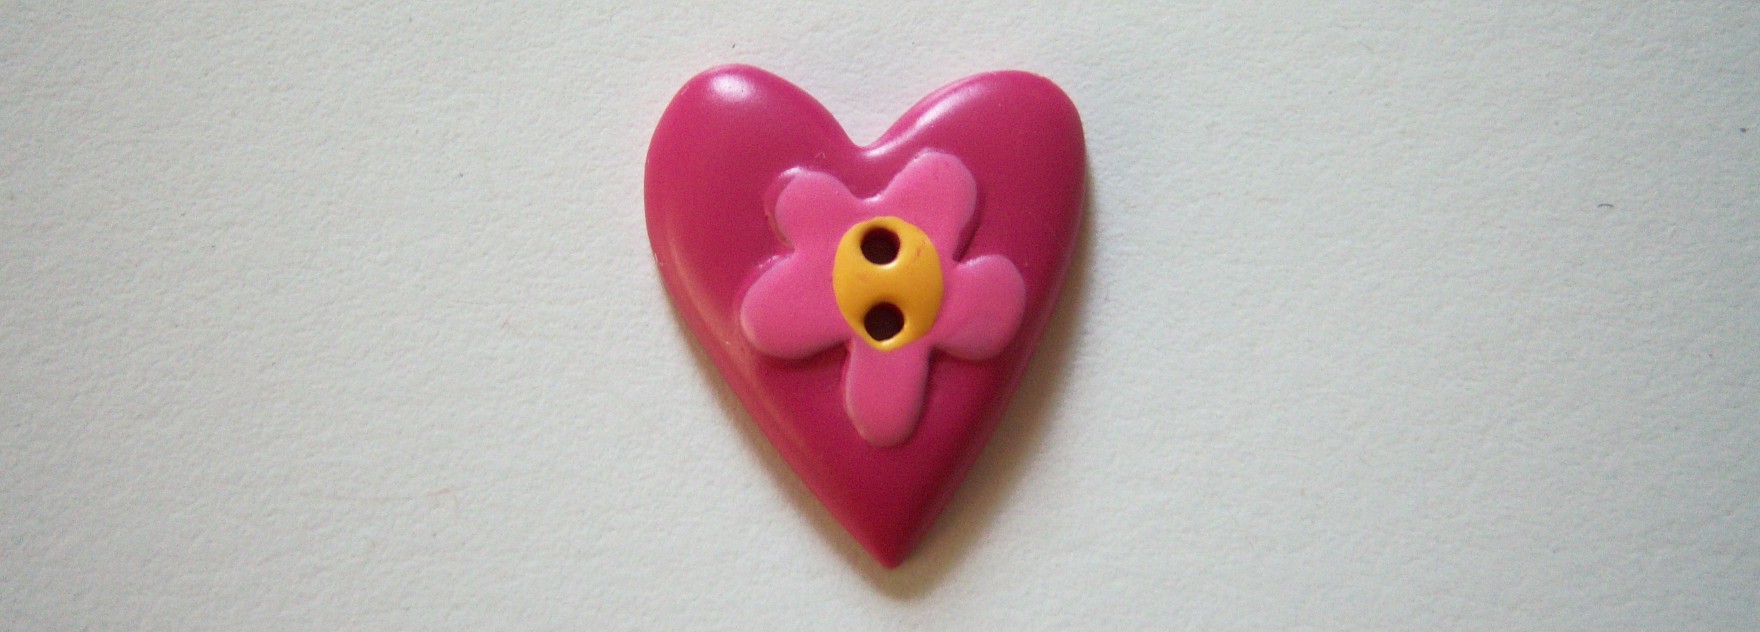 JHB Elongated rasberry heart/pink center daisy with yellow center on 2 holes 3/4" poly resin button.